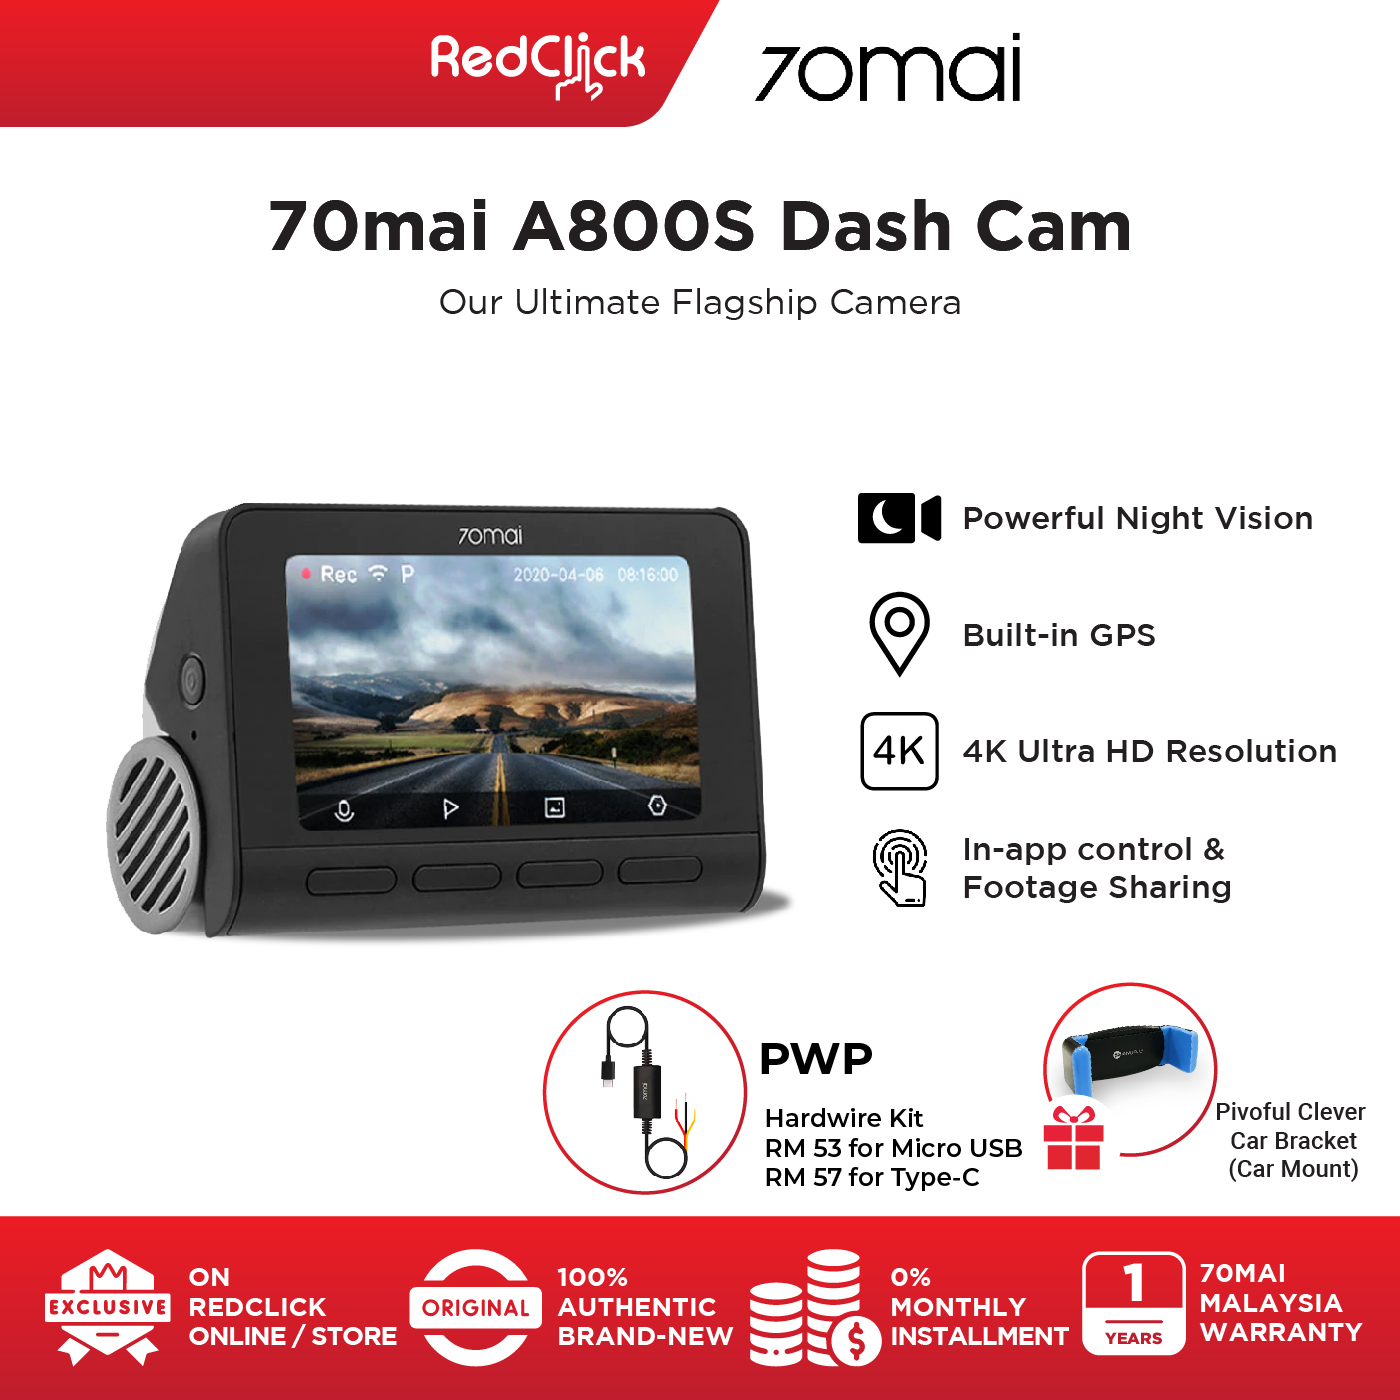 70Mai Dashcam A800s 4K UHD Resolution 3” HD Display Screen Super Night Vision Built-In GPS ADAS Easy Installation Compatible With App Control + Free Gift